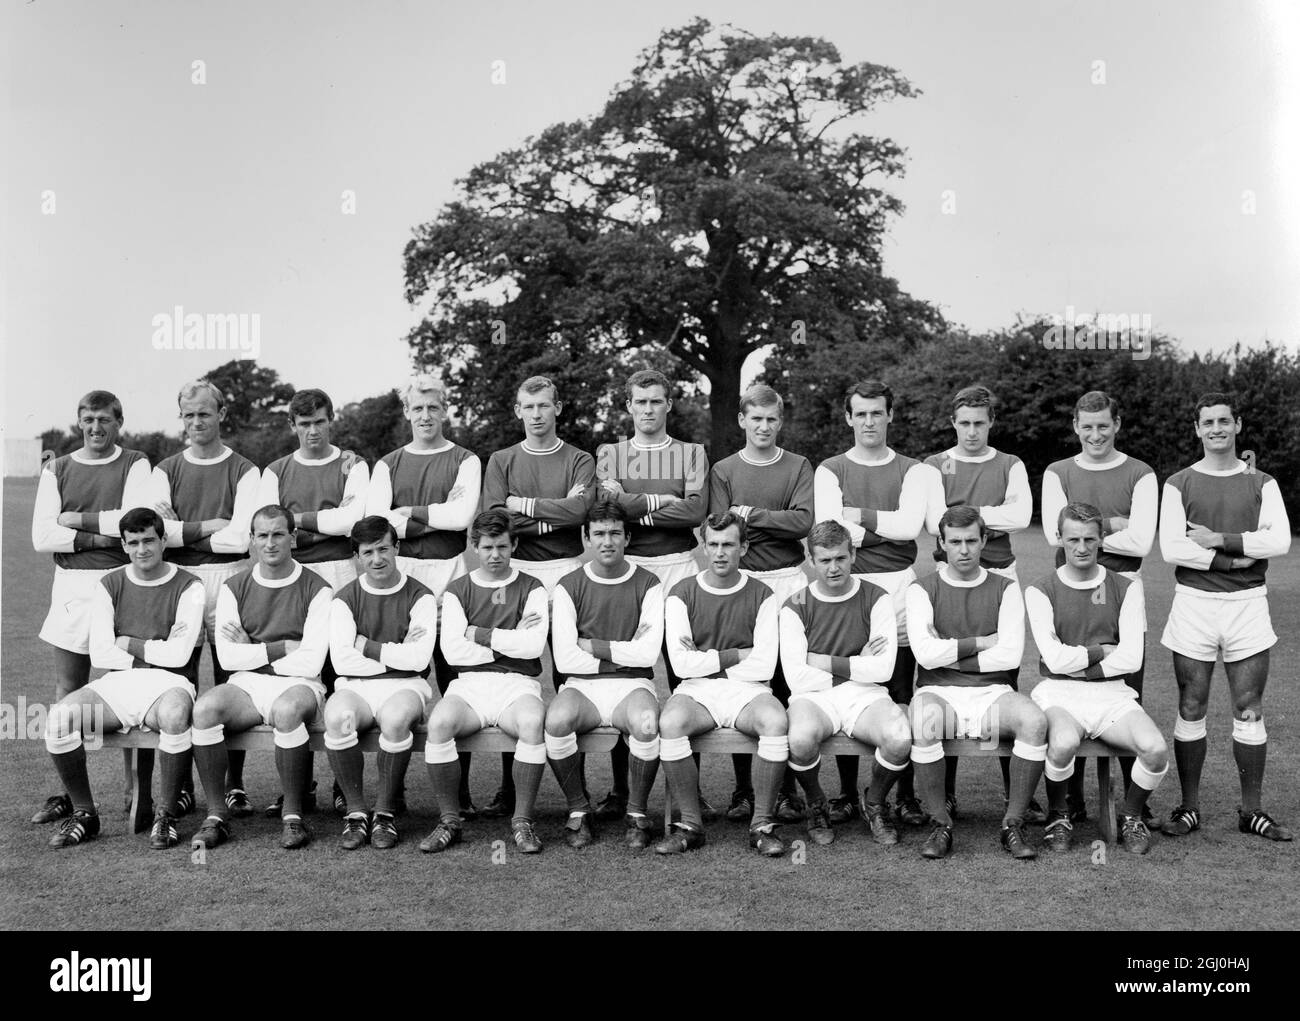 Arsenal FC 1965-1966 Back Row Left to Right: Billy McCullough, Done Howe, Peter Simpson, Ian Ure, Rob Wilson, Jim Furnell, Tony Burns, Alan Skirton, John Radford, Tery Neill and Frank McLintock. Front Row Left to Right Peter Storey, Jim Magill, George Armstrong, Brian Tawse, John Sammels, Tommy Balswin, Joe Baker, David Court and George Eastham. 2nd August 1965 Stock Photo